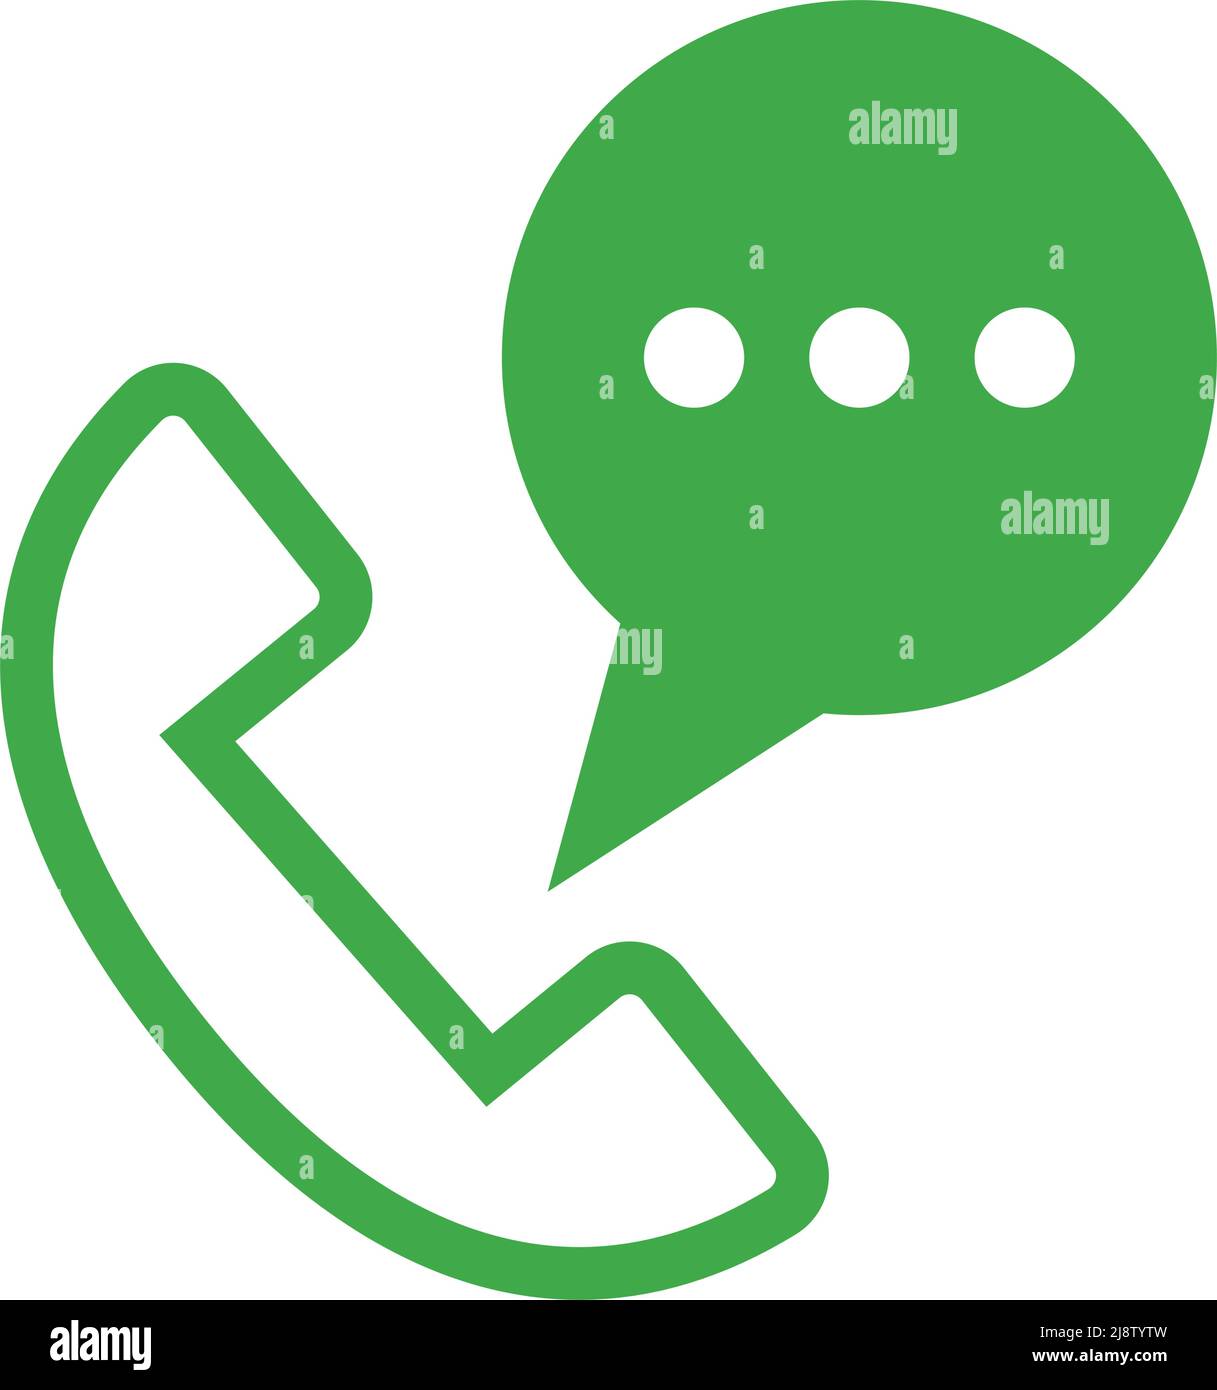 Phone icon and message icon. Editable vector. Stock Vector